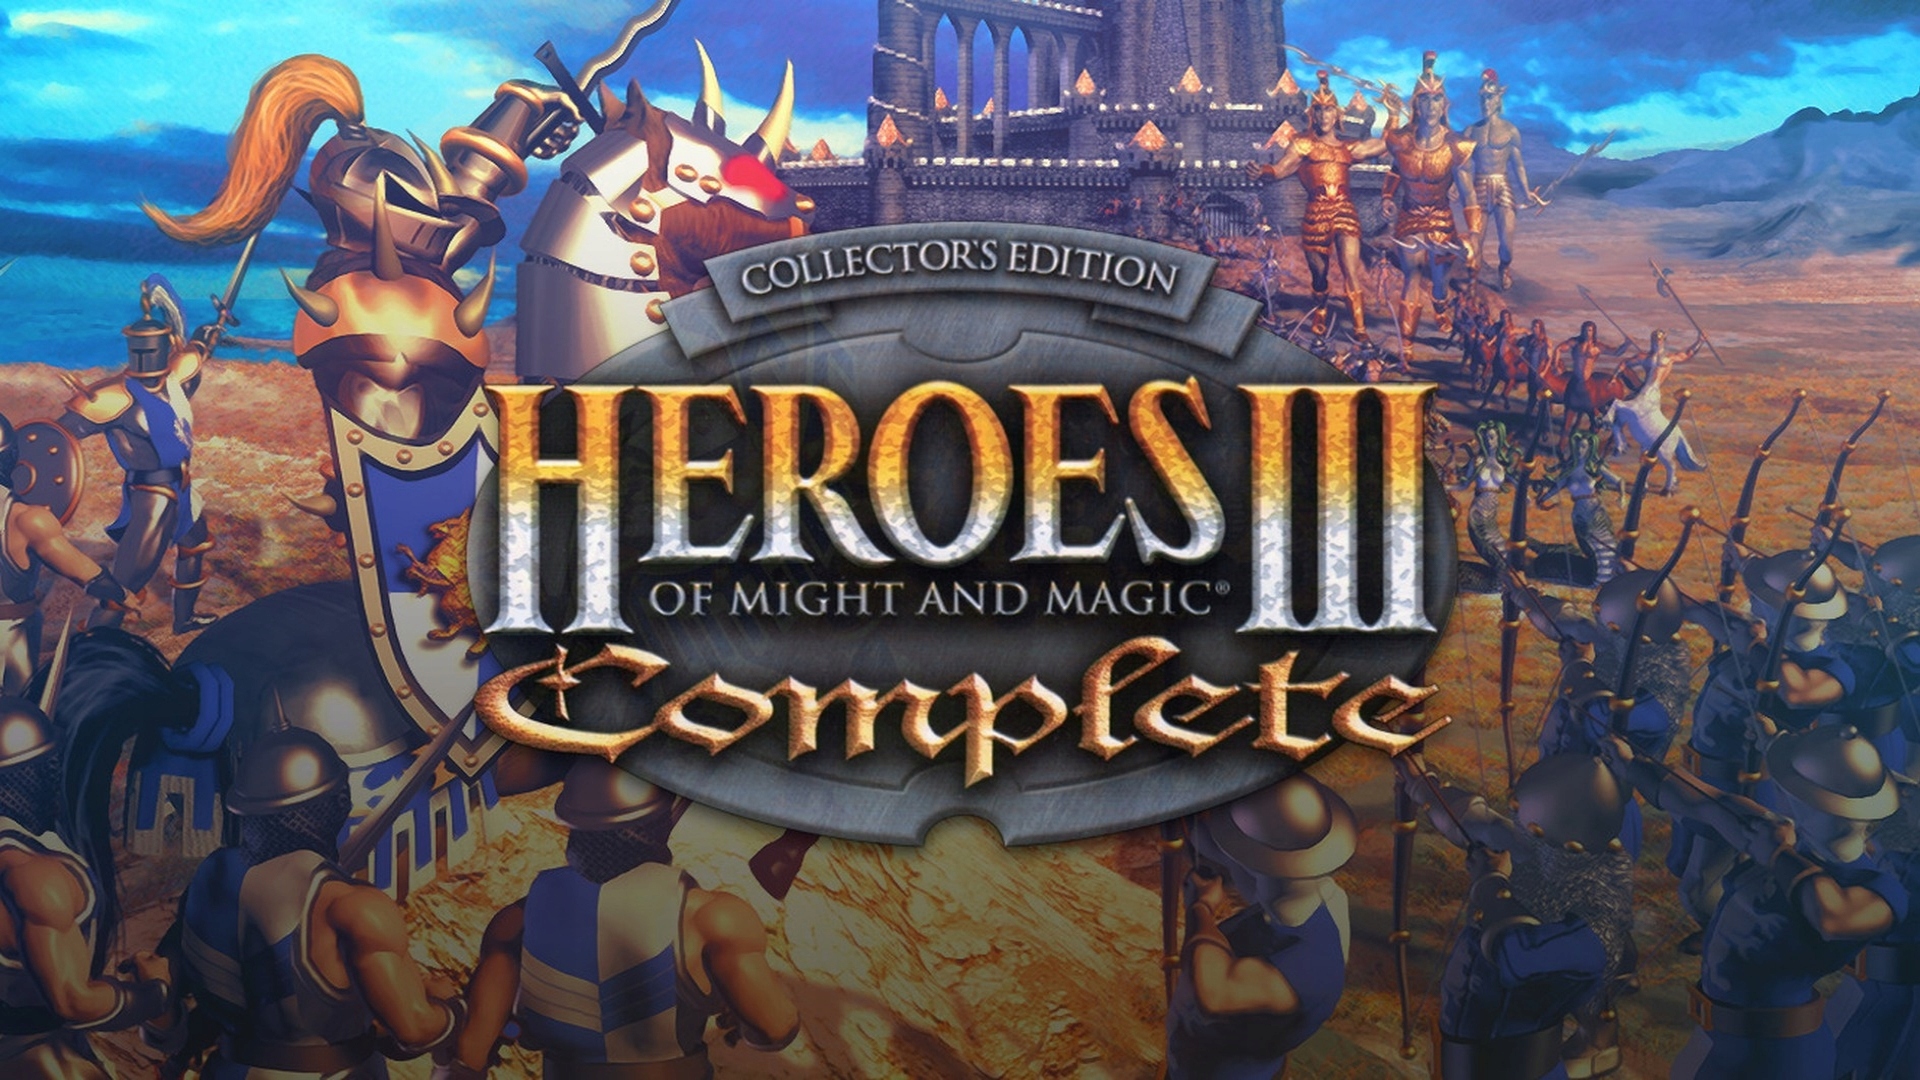 Heroes of the might and magic 3 steam фото 29